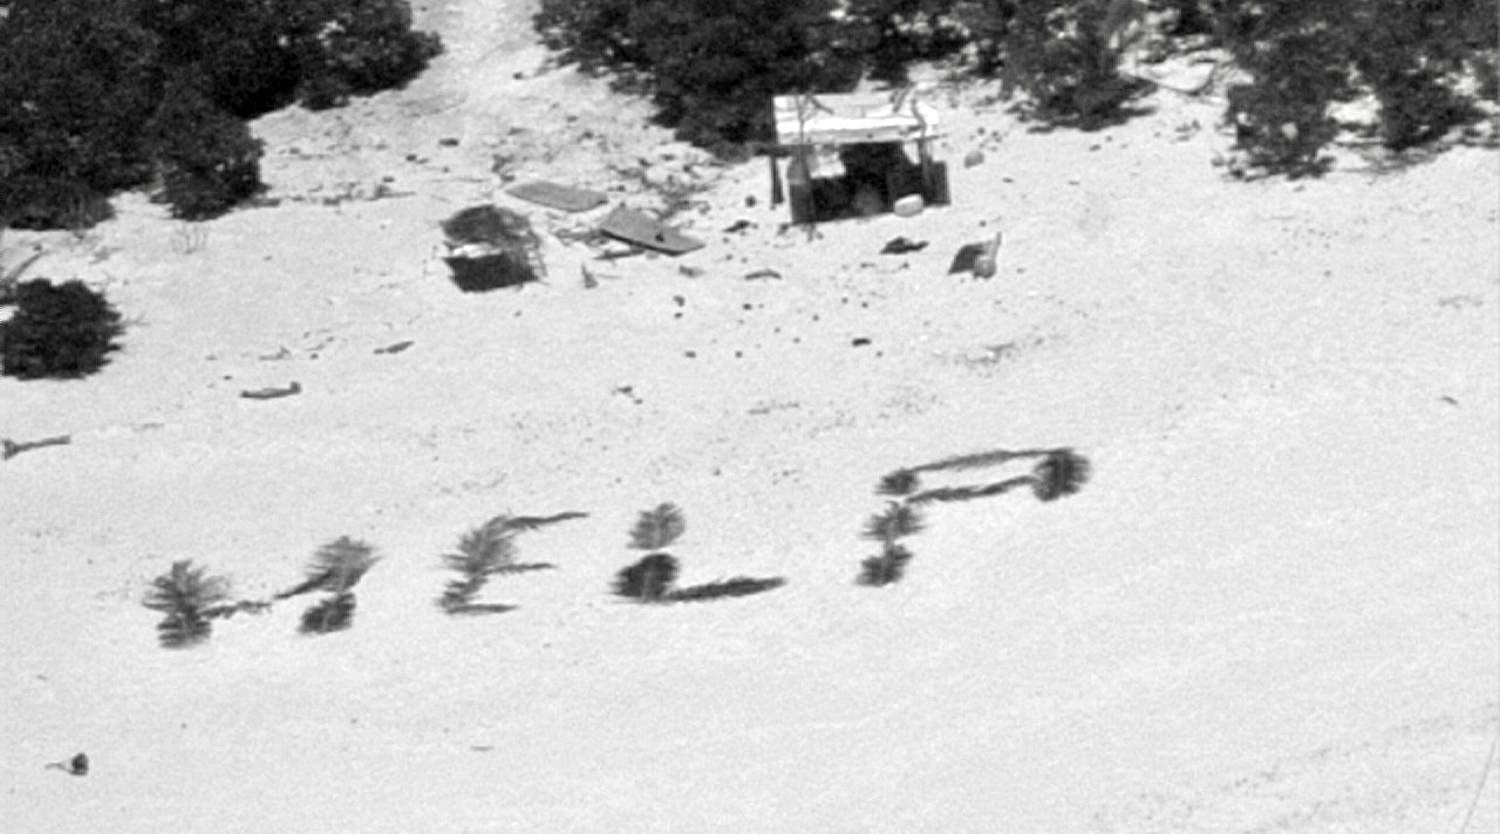 Stranded sailors rescued from tiny Pacific island after making ‘HELP’ sign with leaves